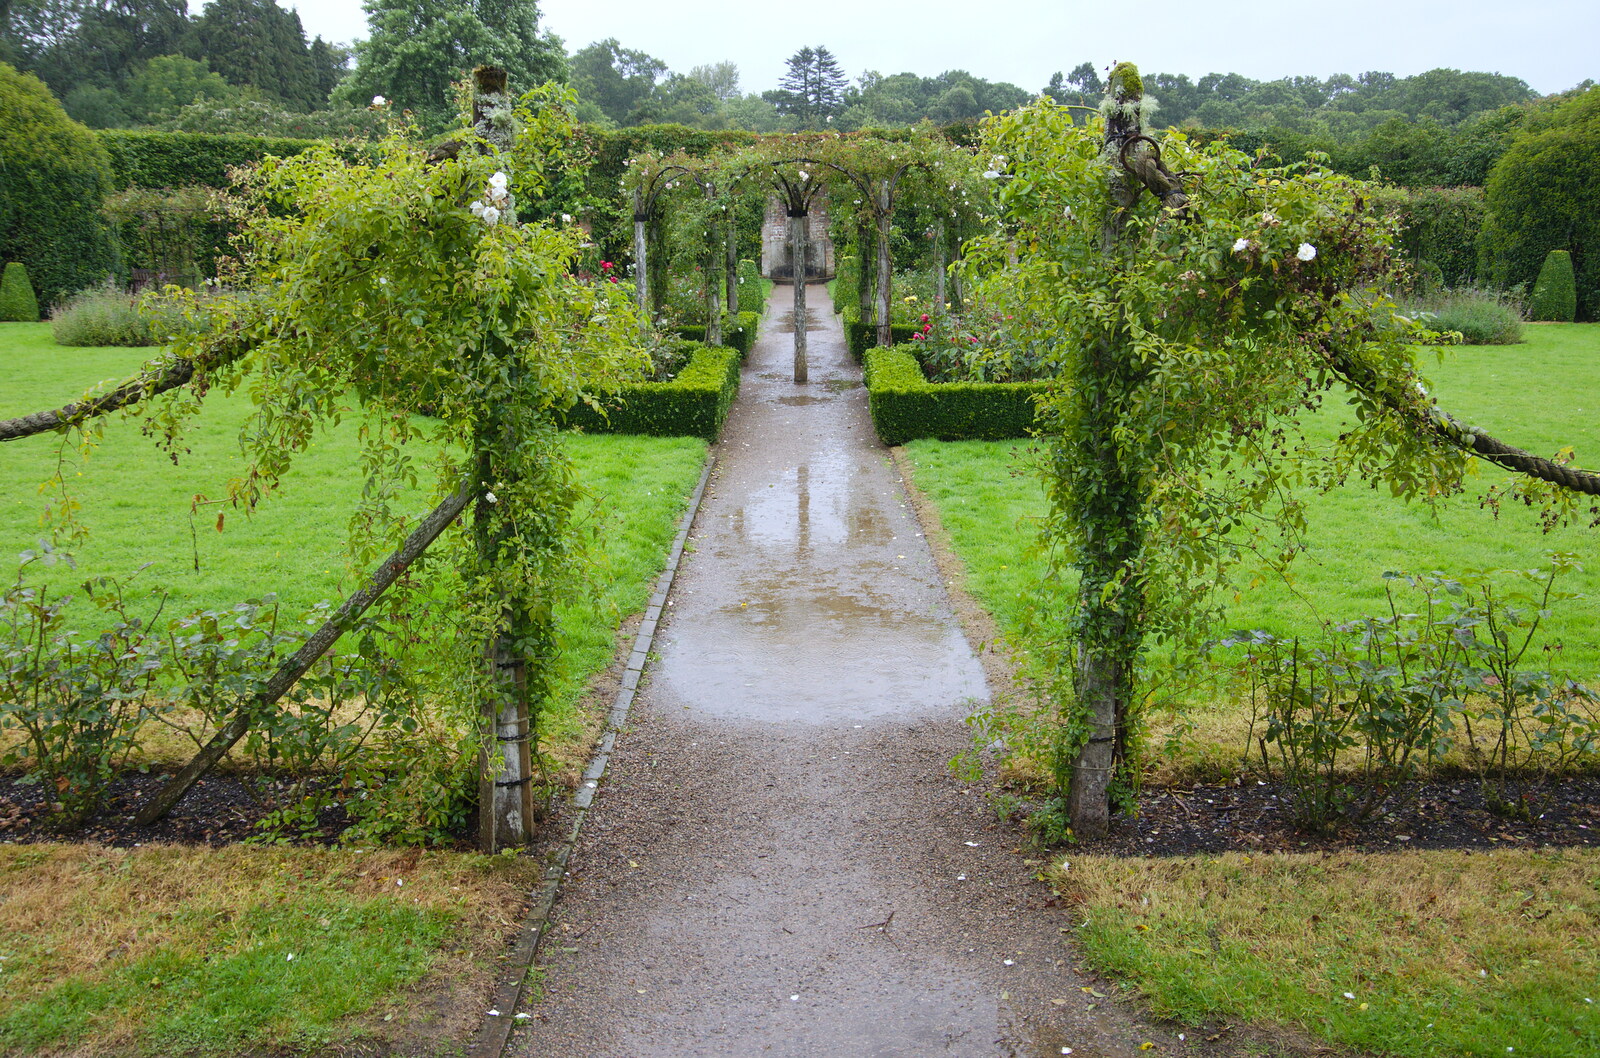 The ornamental gardens are a bit on the soggy side from Florence Court and a Postcard from Sligo, Fermanagh and Sligo, Ireland - 21st August 2019